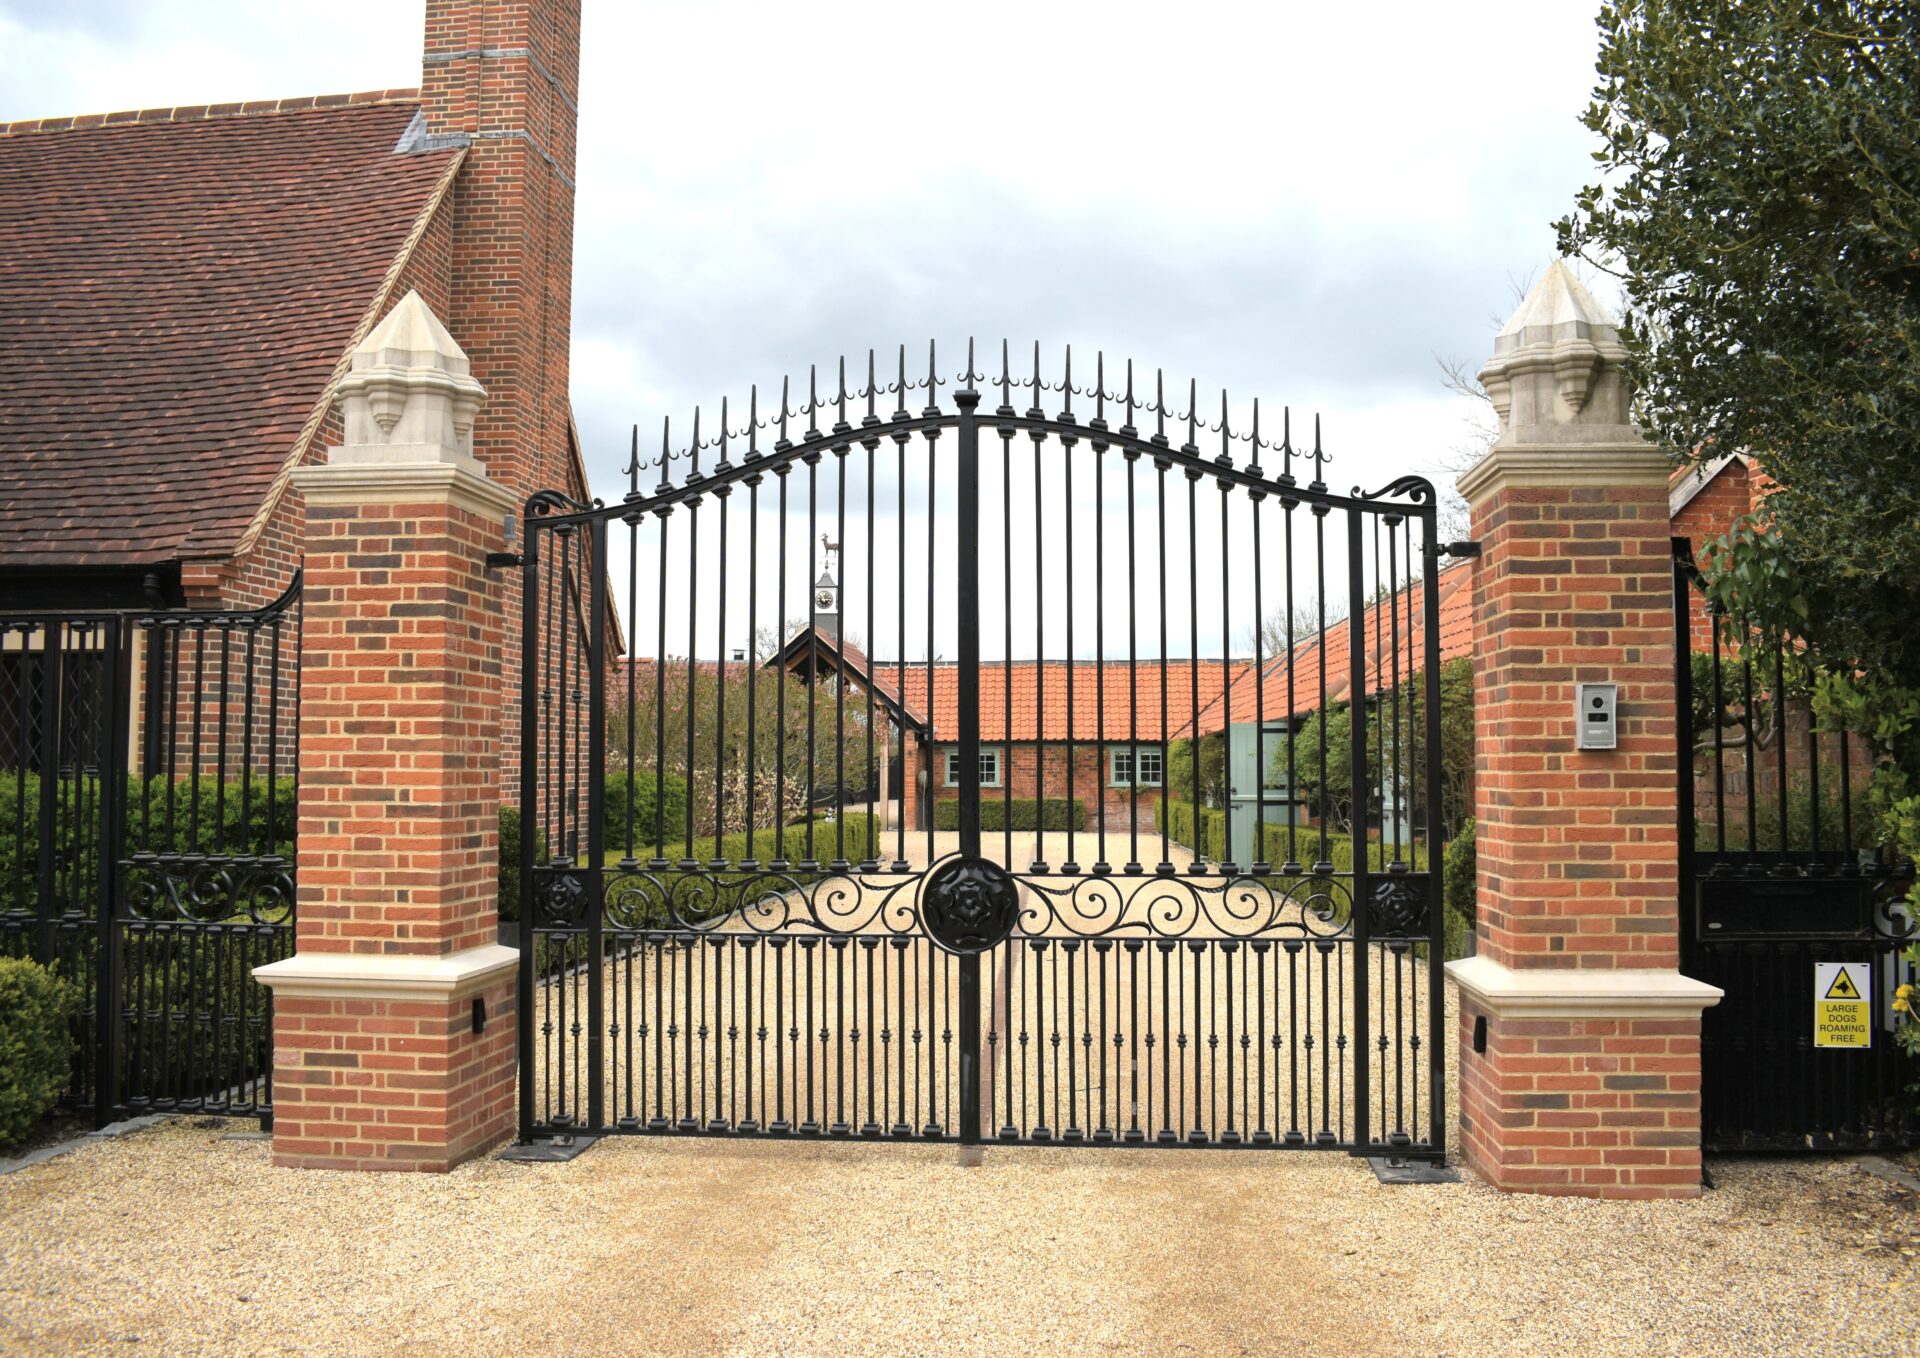 Stunning wrought iron gates and railings made by The Blacksmith Shop and installed at this prestigious entrance.